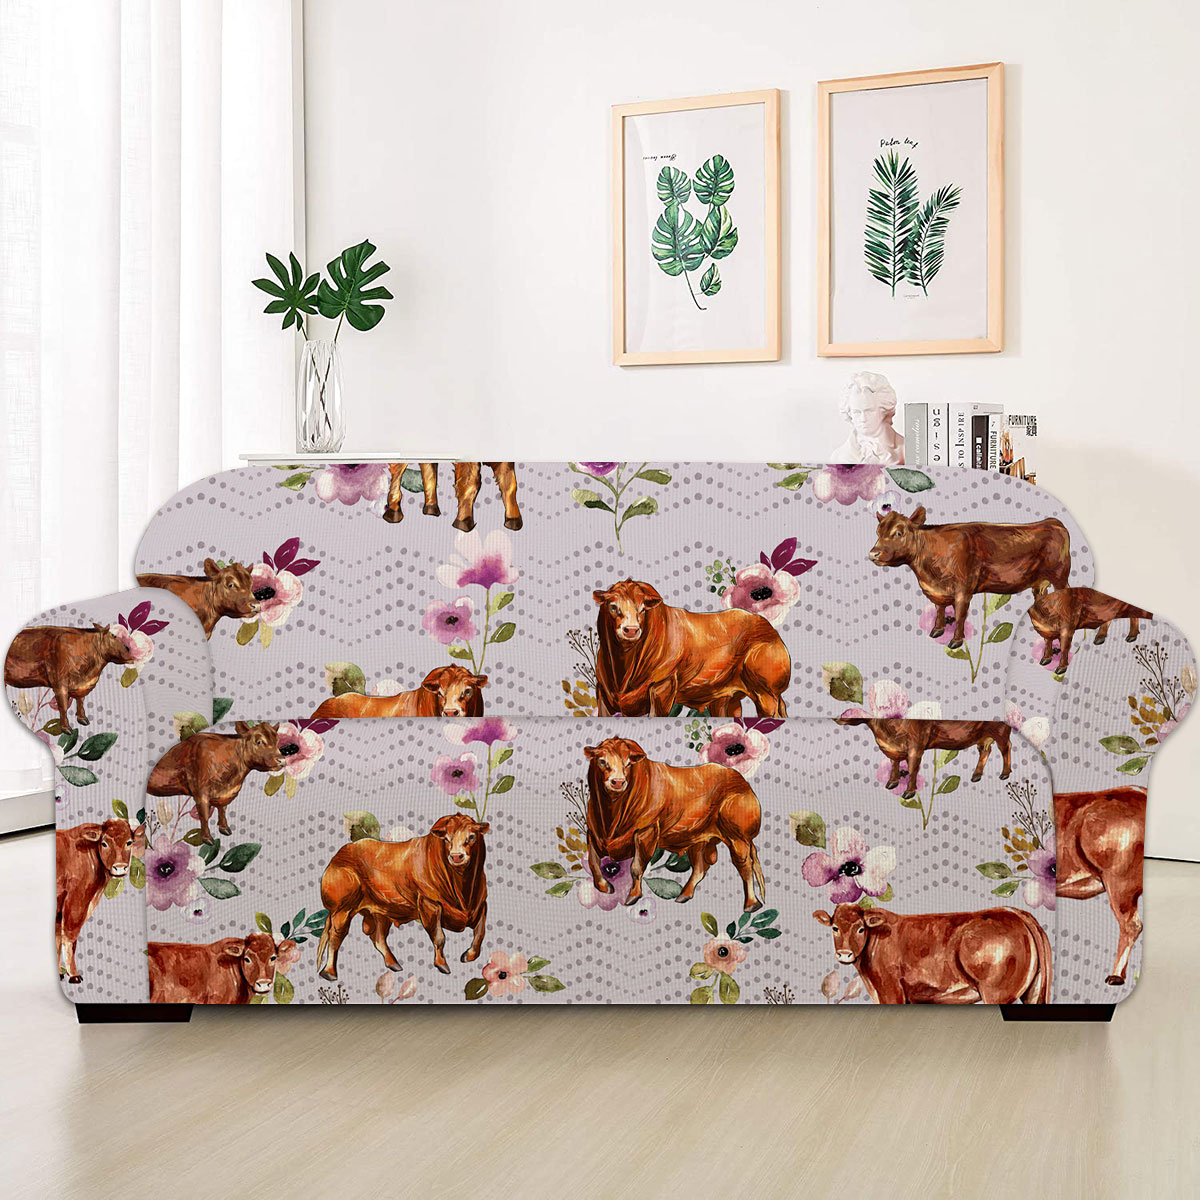 Beefmaster Autumn Amethyst Boho Floral Pattern Sofa Cover